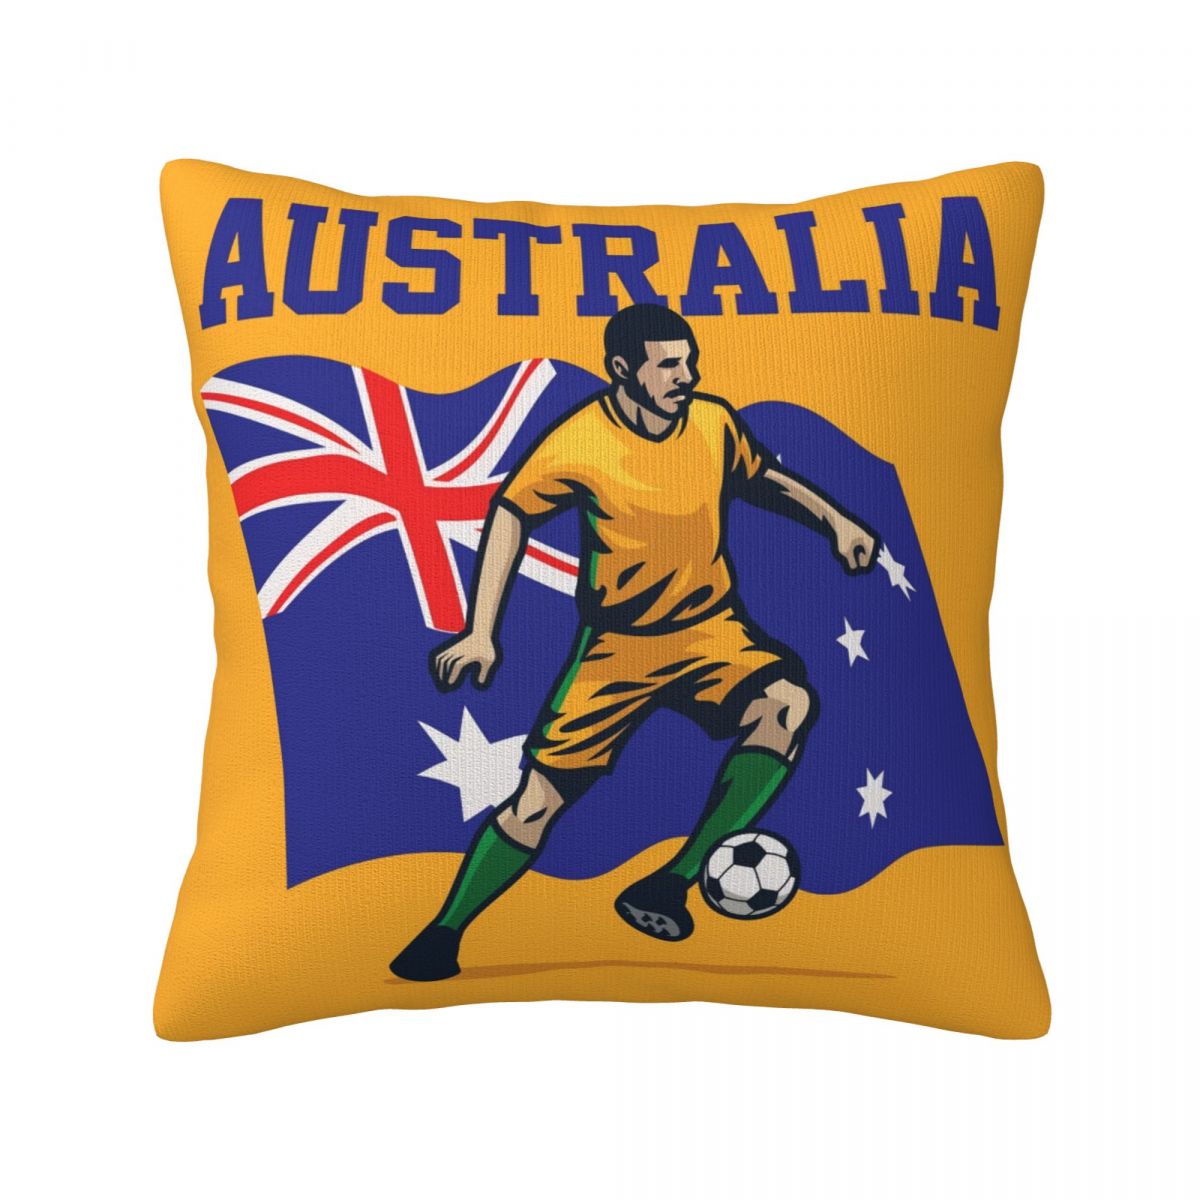 Australia Soccer Player Decorative Square Throw Pillow Covers